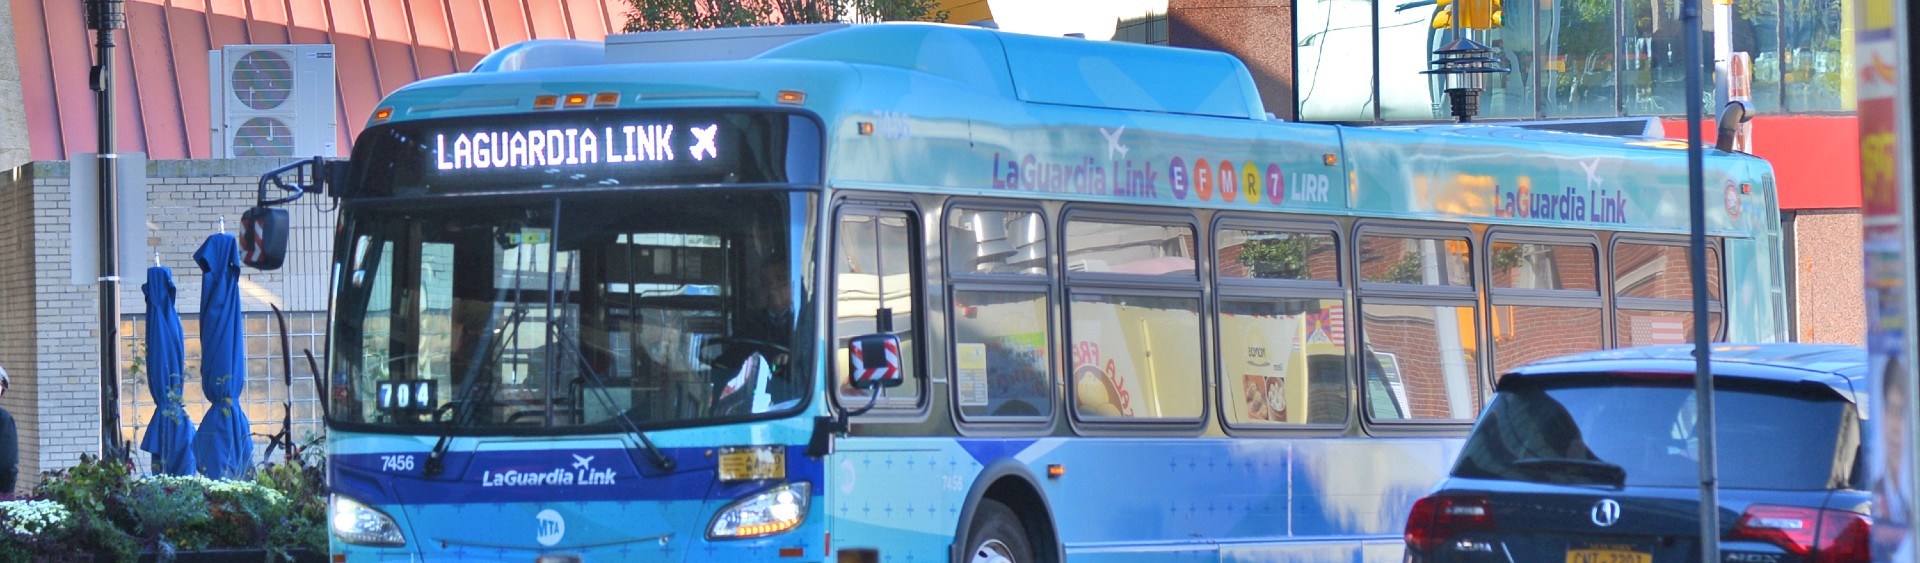 A bus traveling on a city street. A sign on the front of the bus reads "LaGuardia Link." 